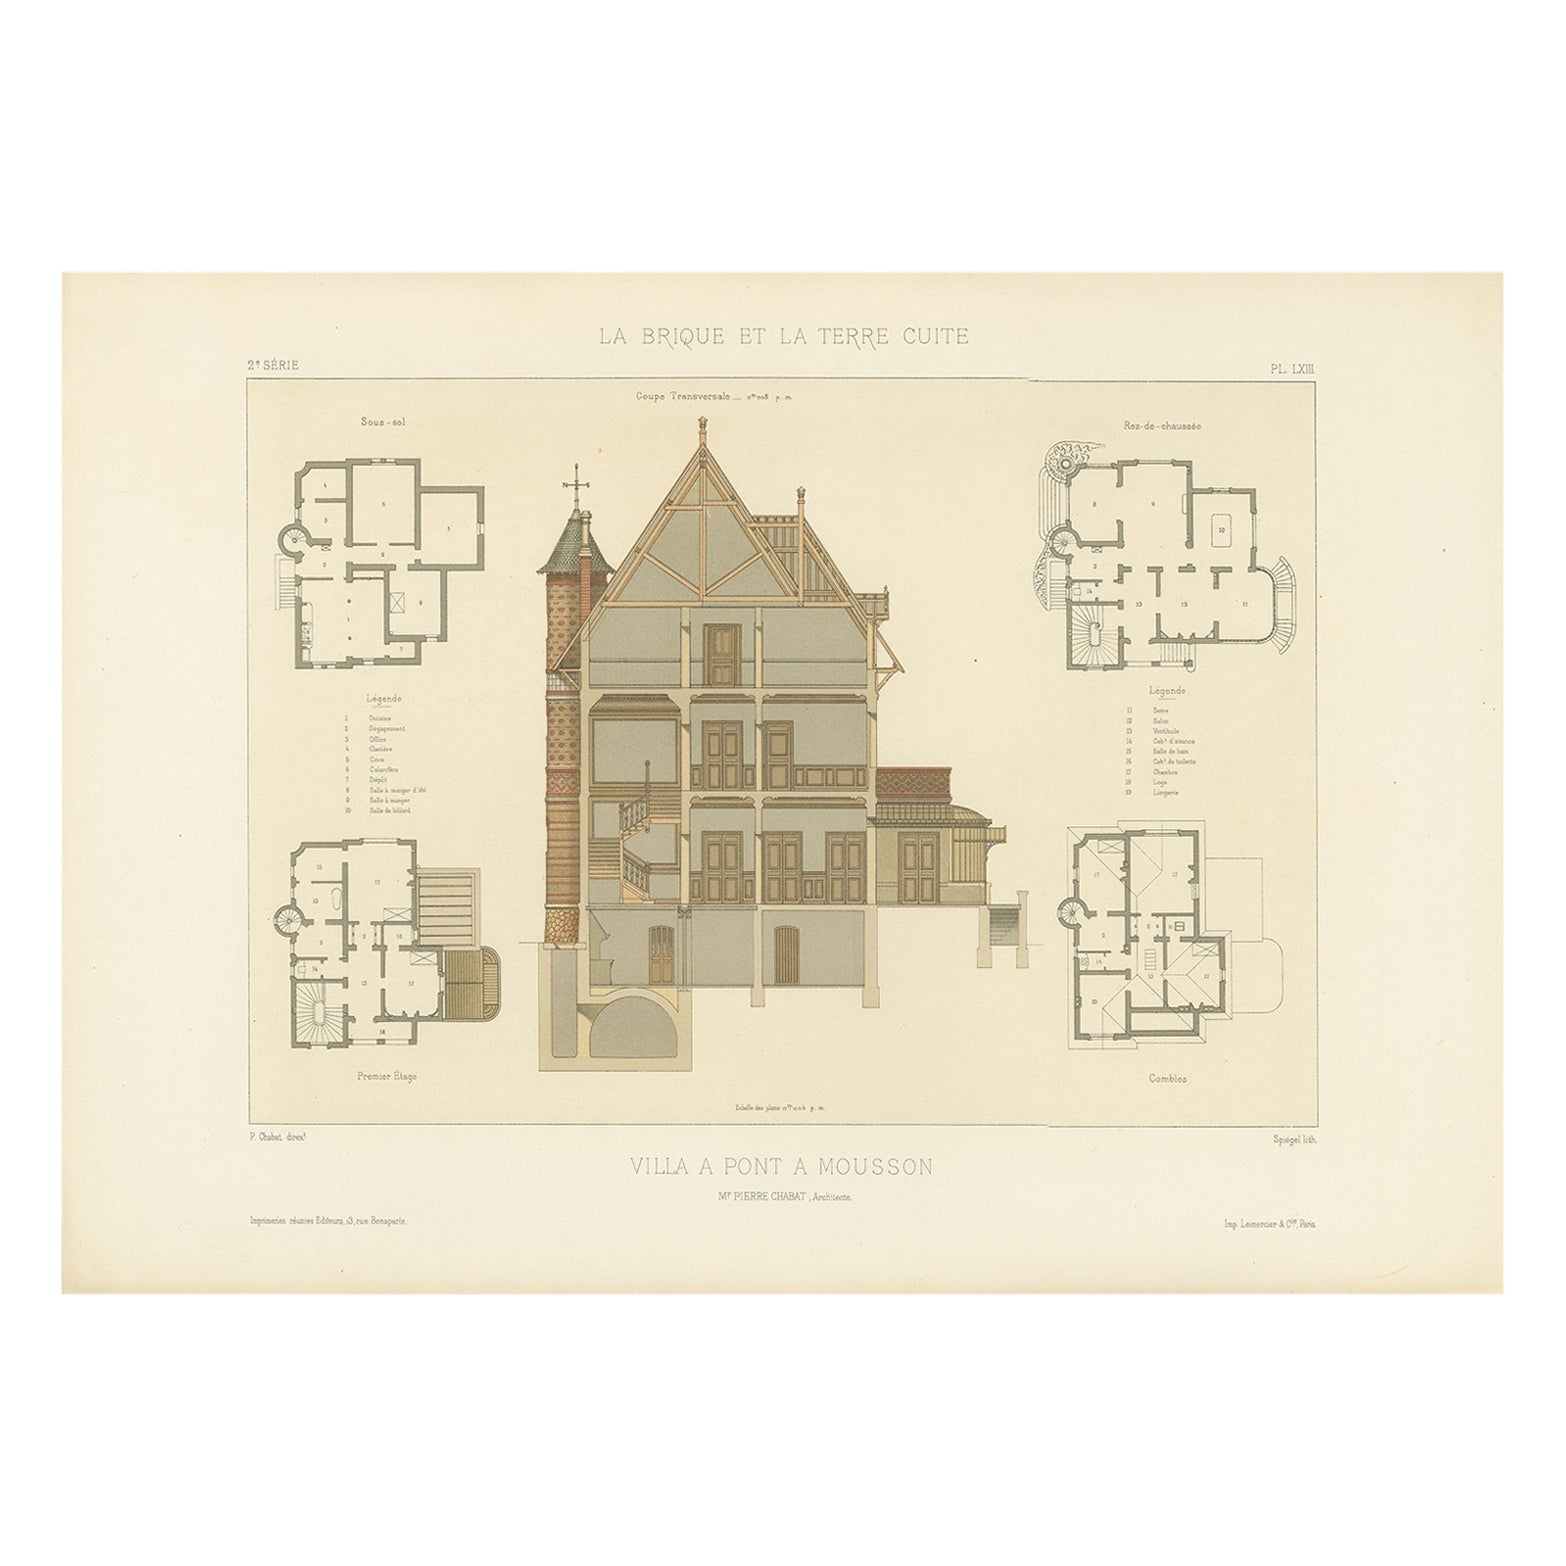 Architectural Impression of Villa a Pont a Mousson in France, Chabat, c.1900